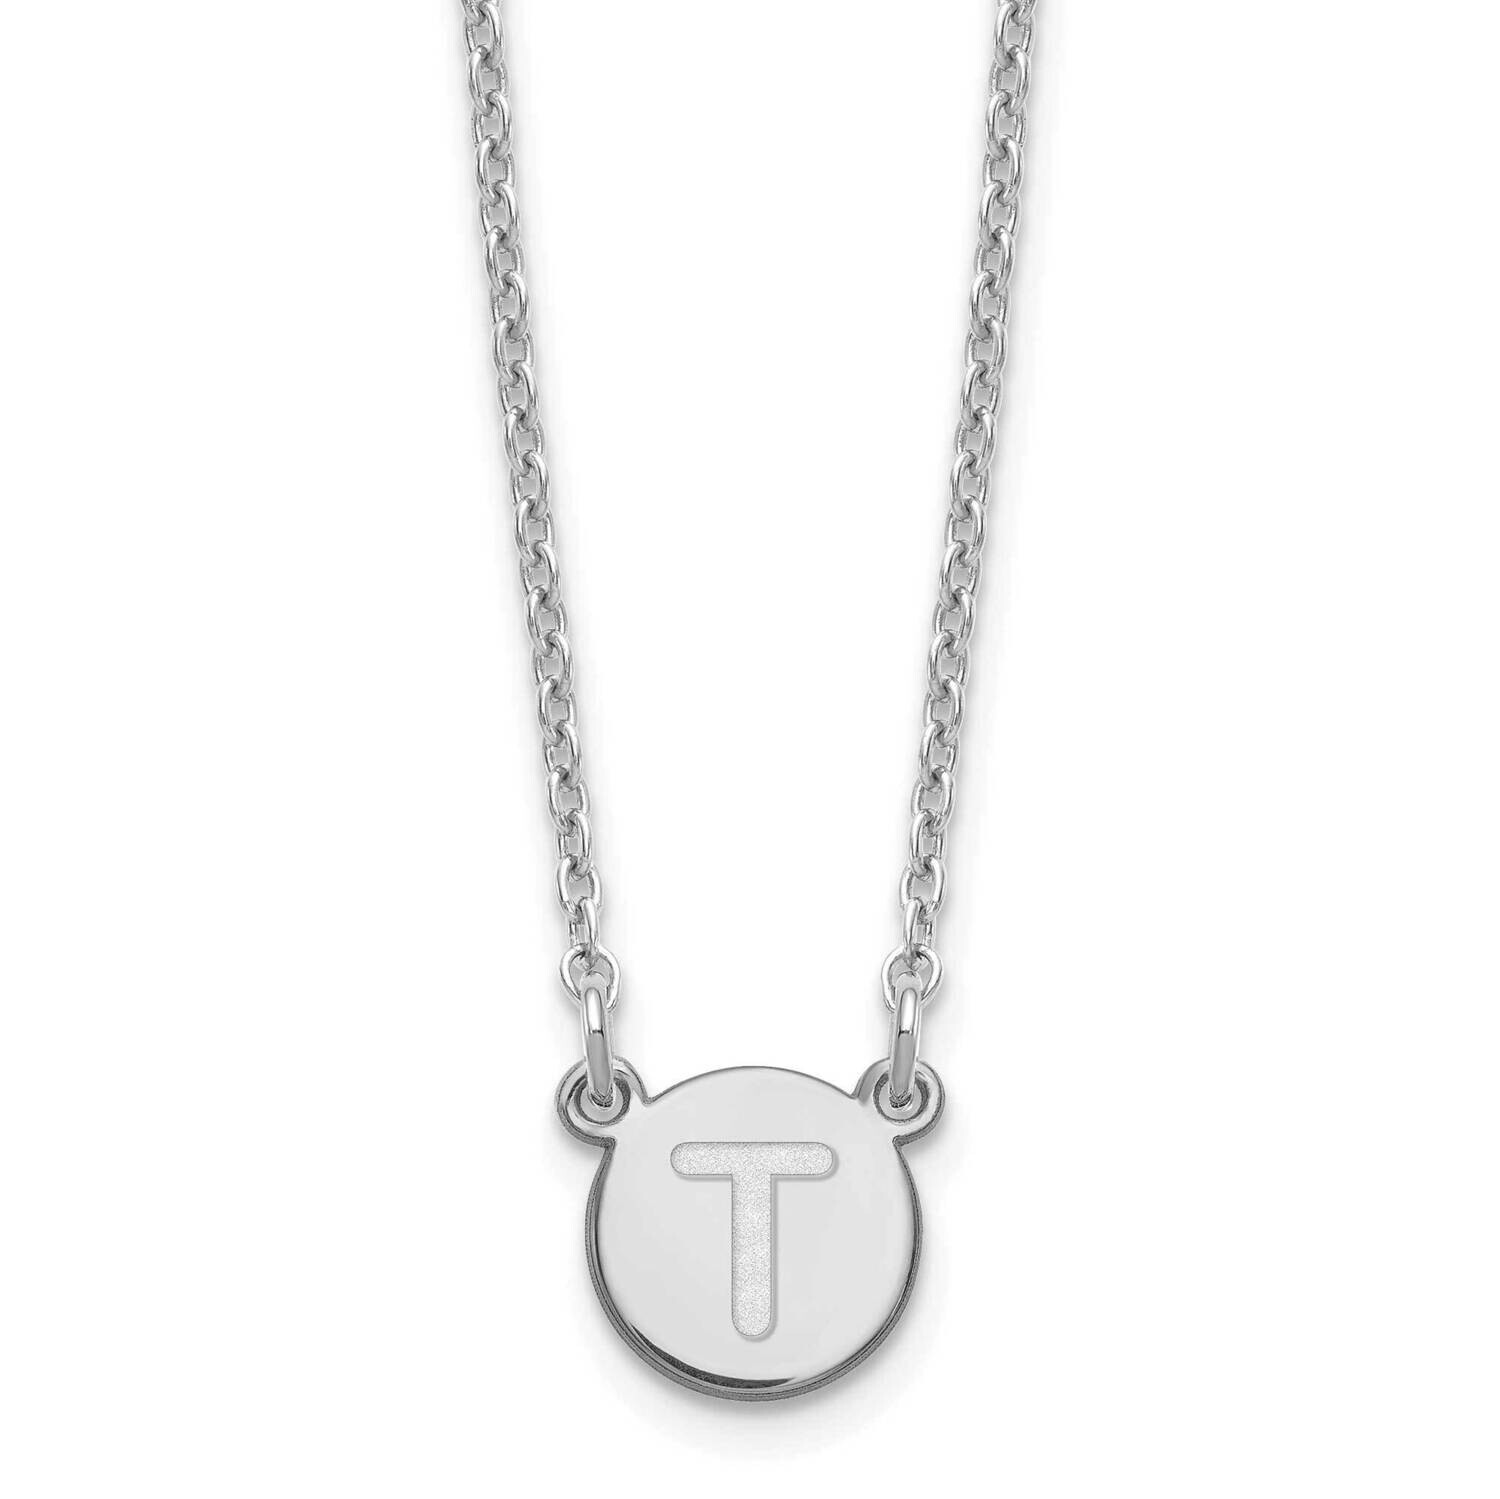 Tiny Circle Block Letter T Initial Necklace Sterling Silver Rhodium-Plated XNA722SS/T